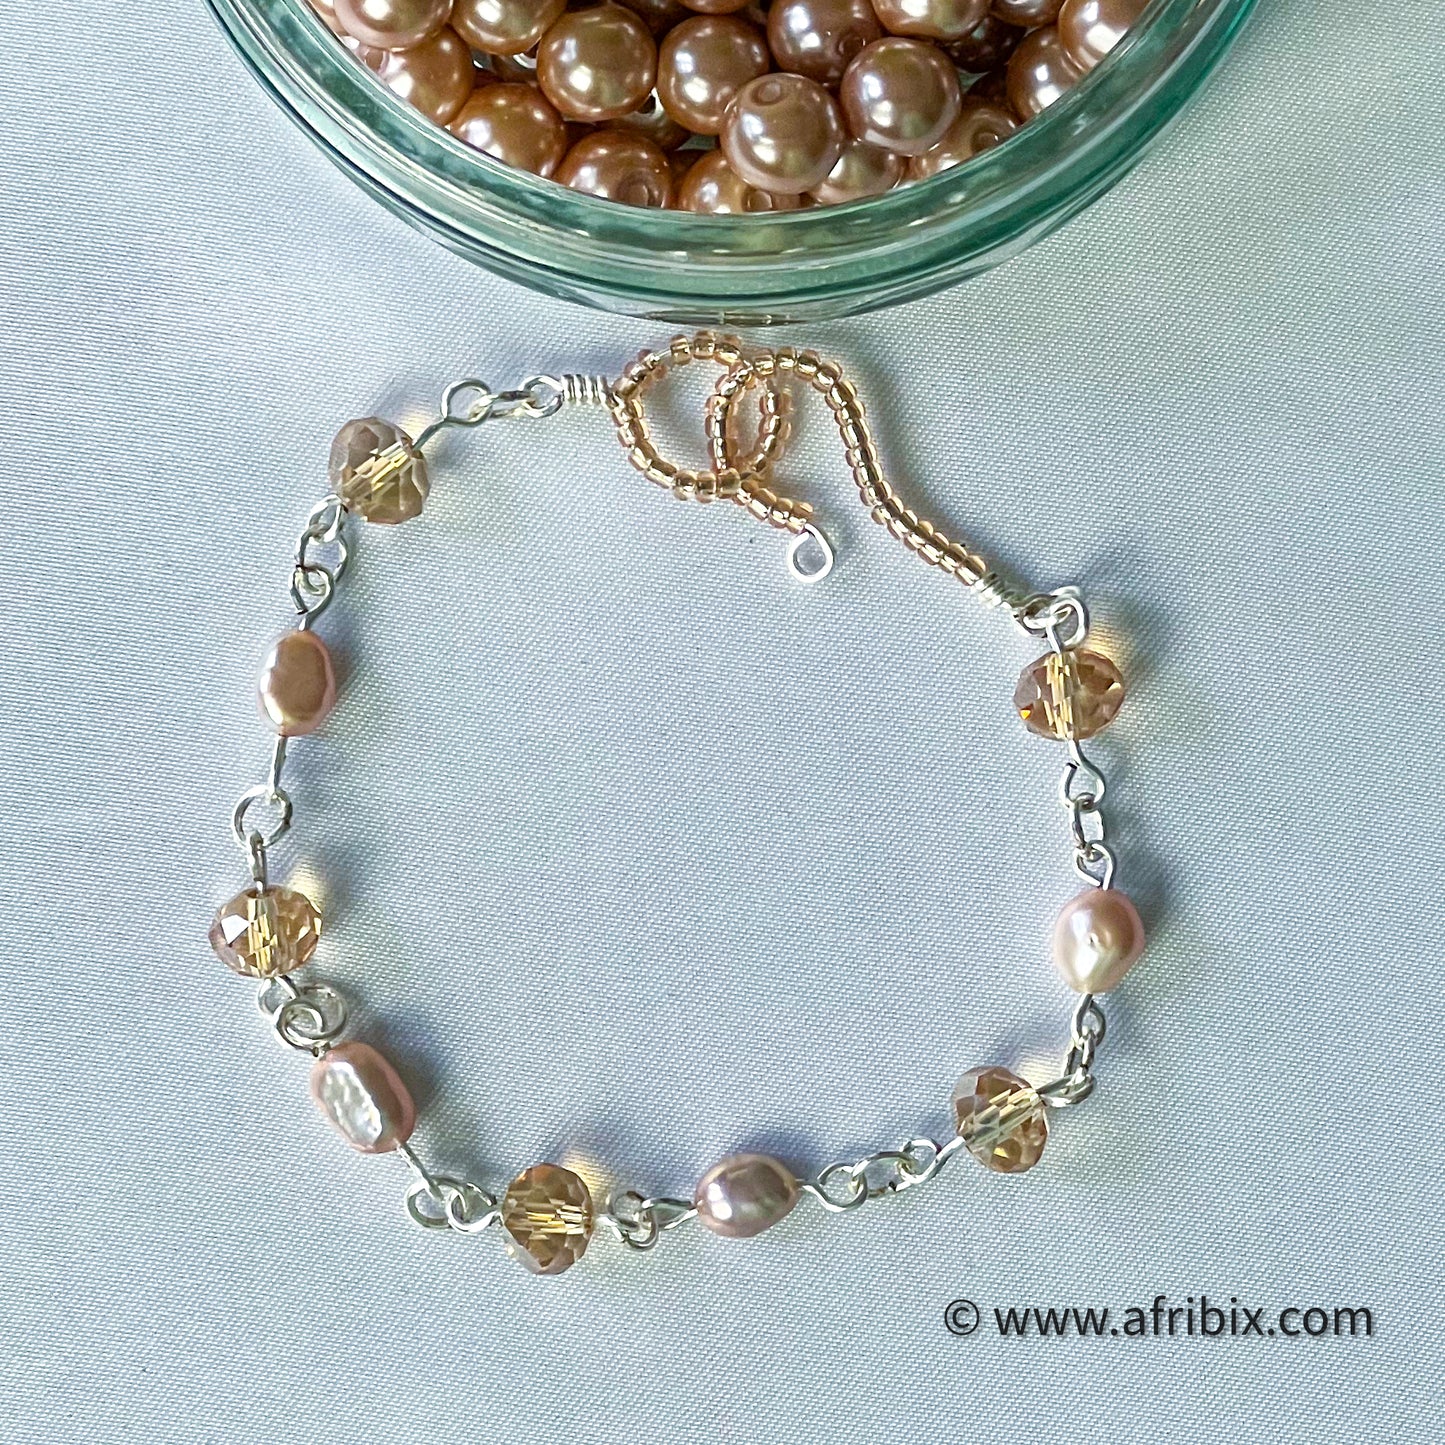 Crystal and Freshwater Pearl Bracelet